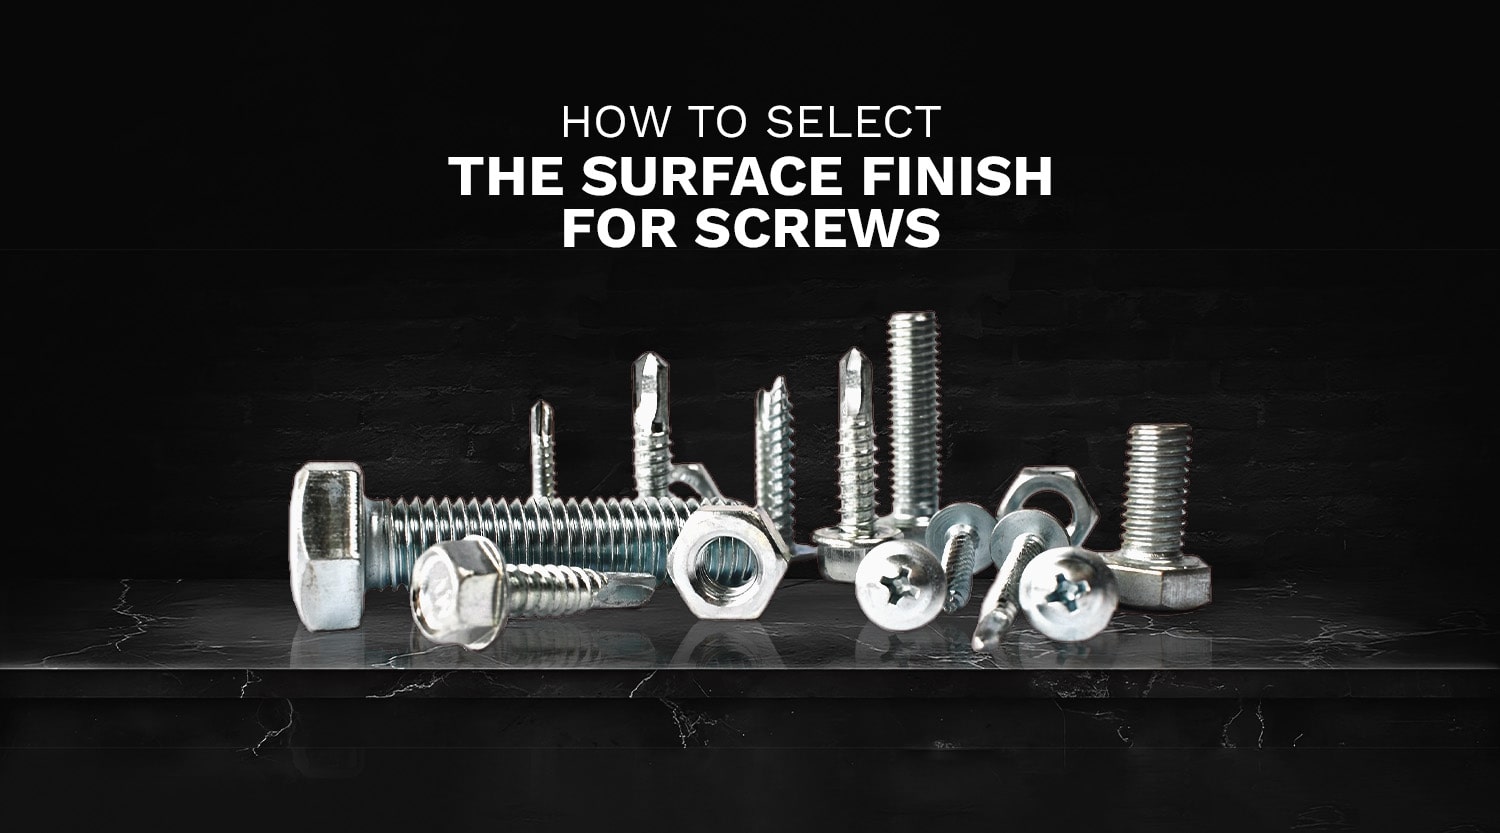 How to Select the Surface Finish for Screws?